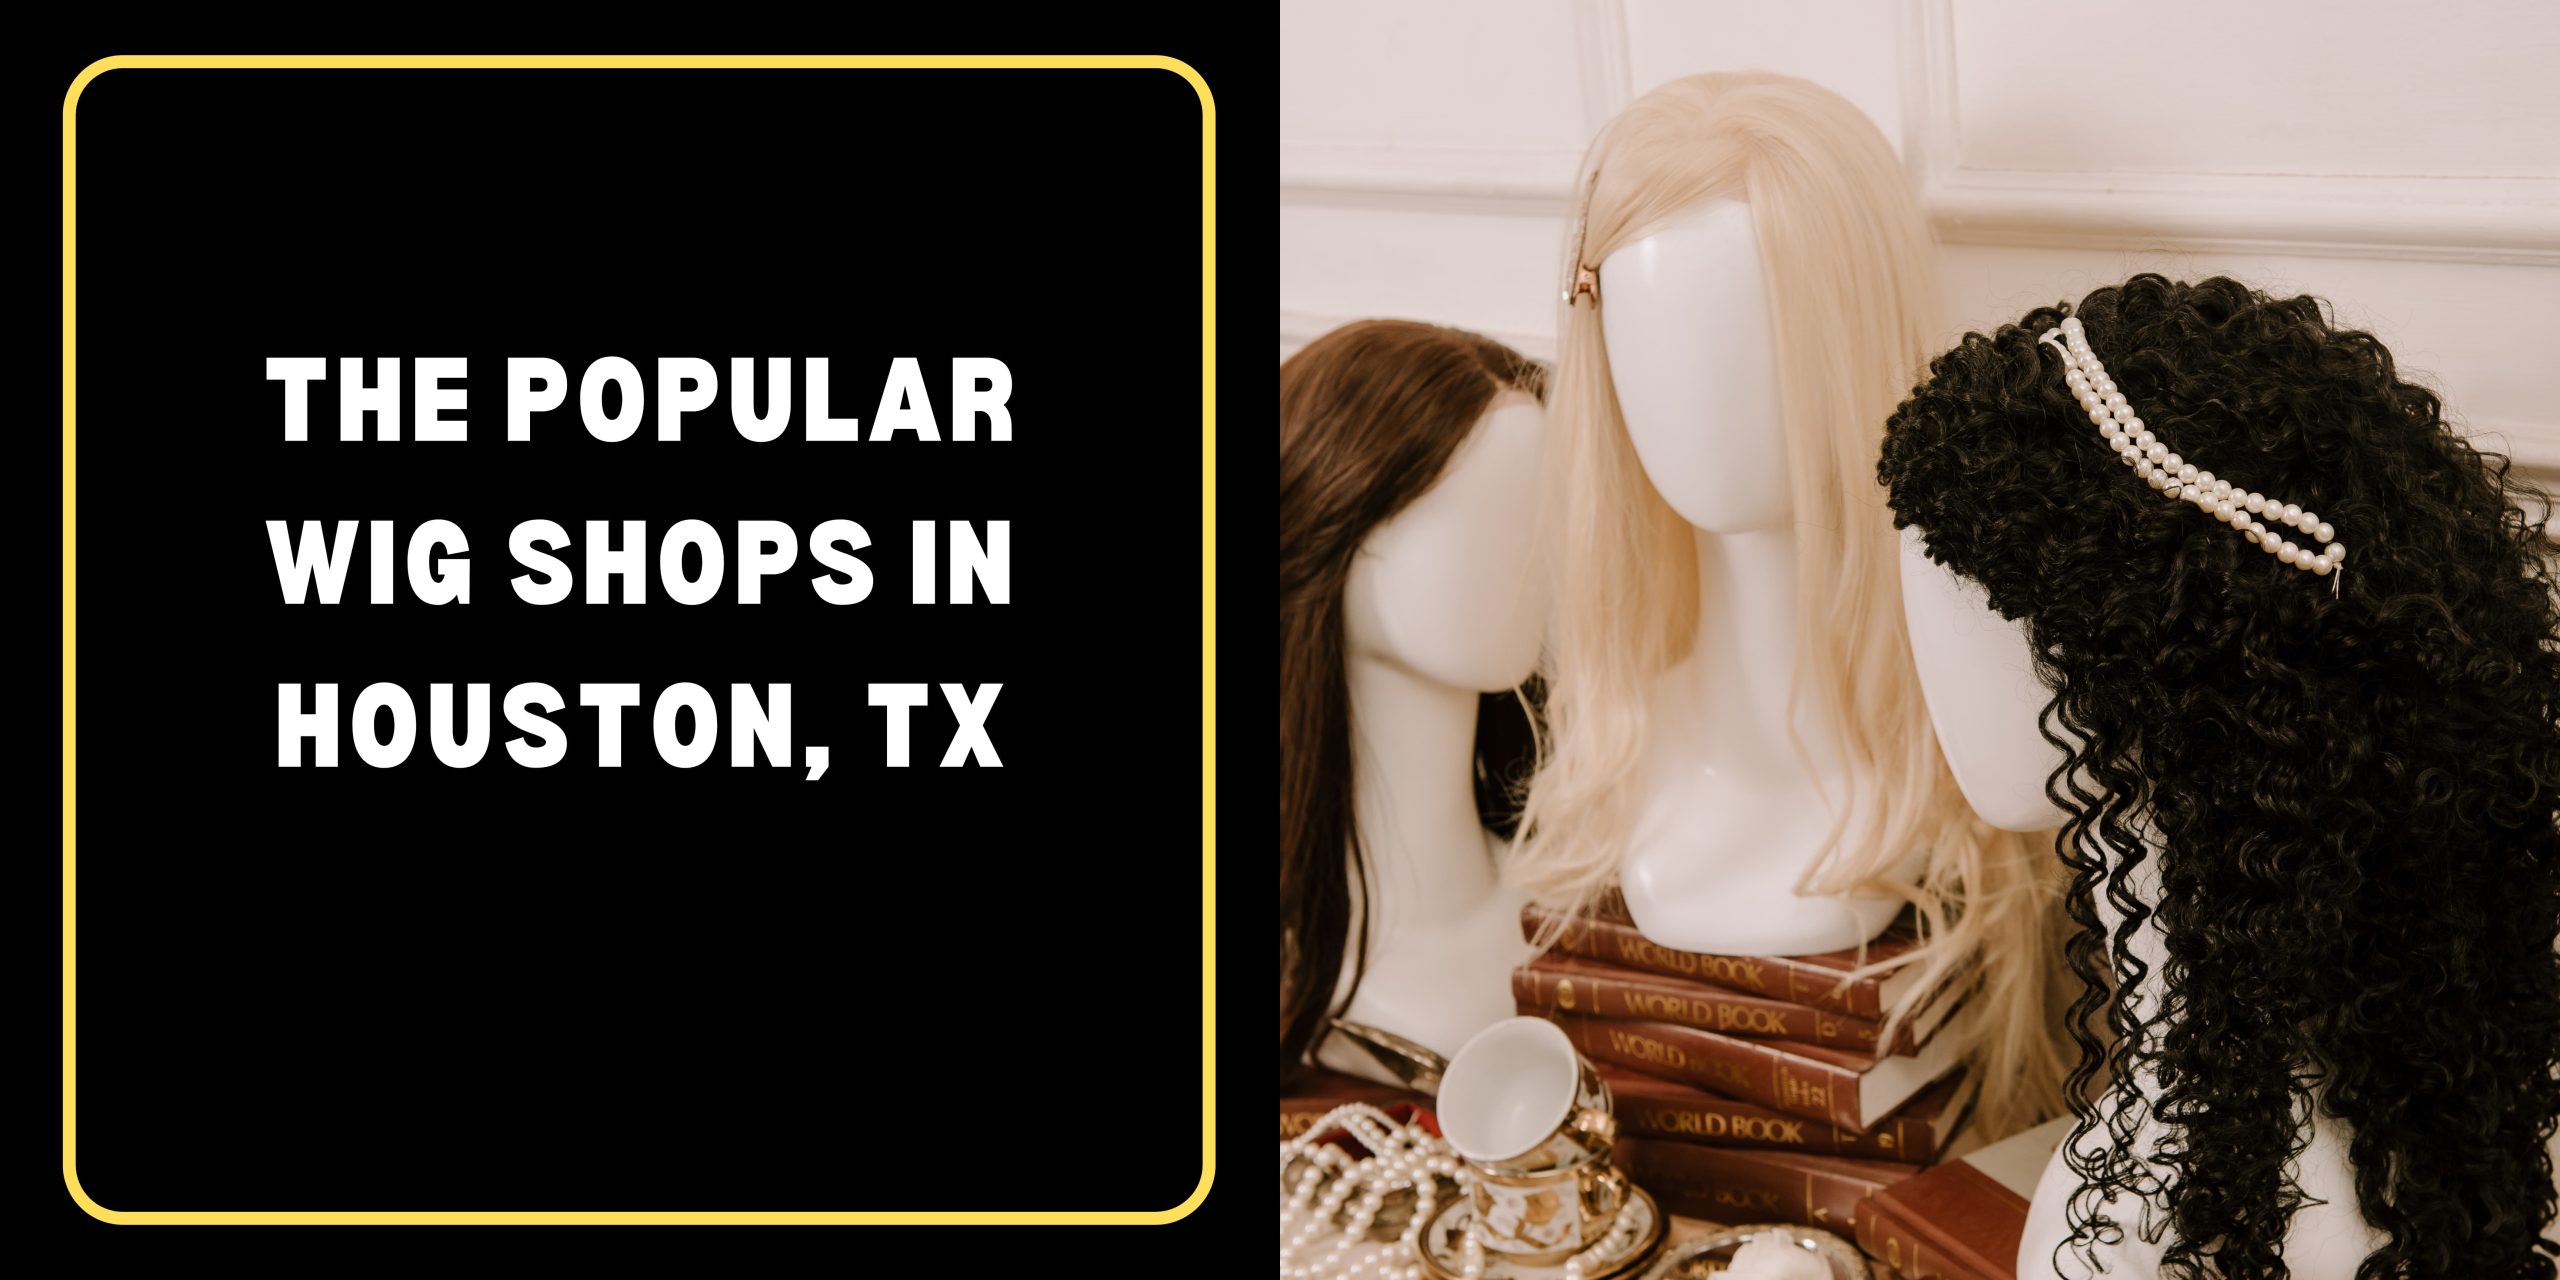 The Popular Wig Shops in Houston, TX